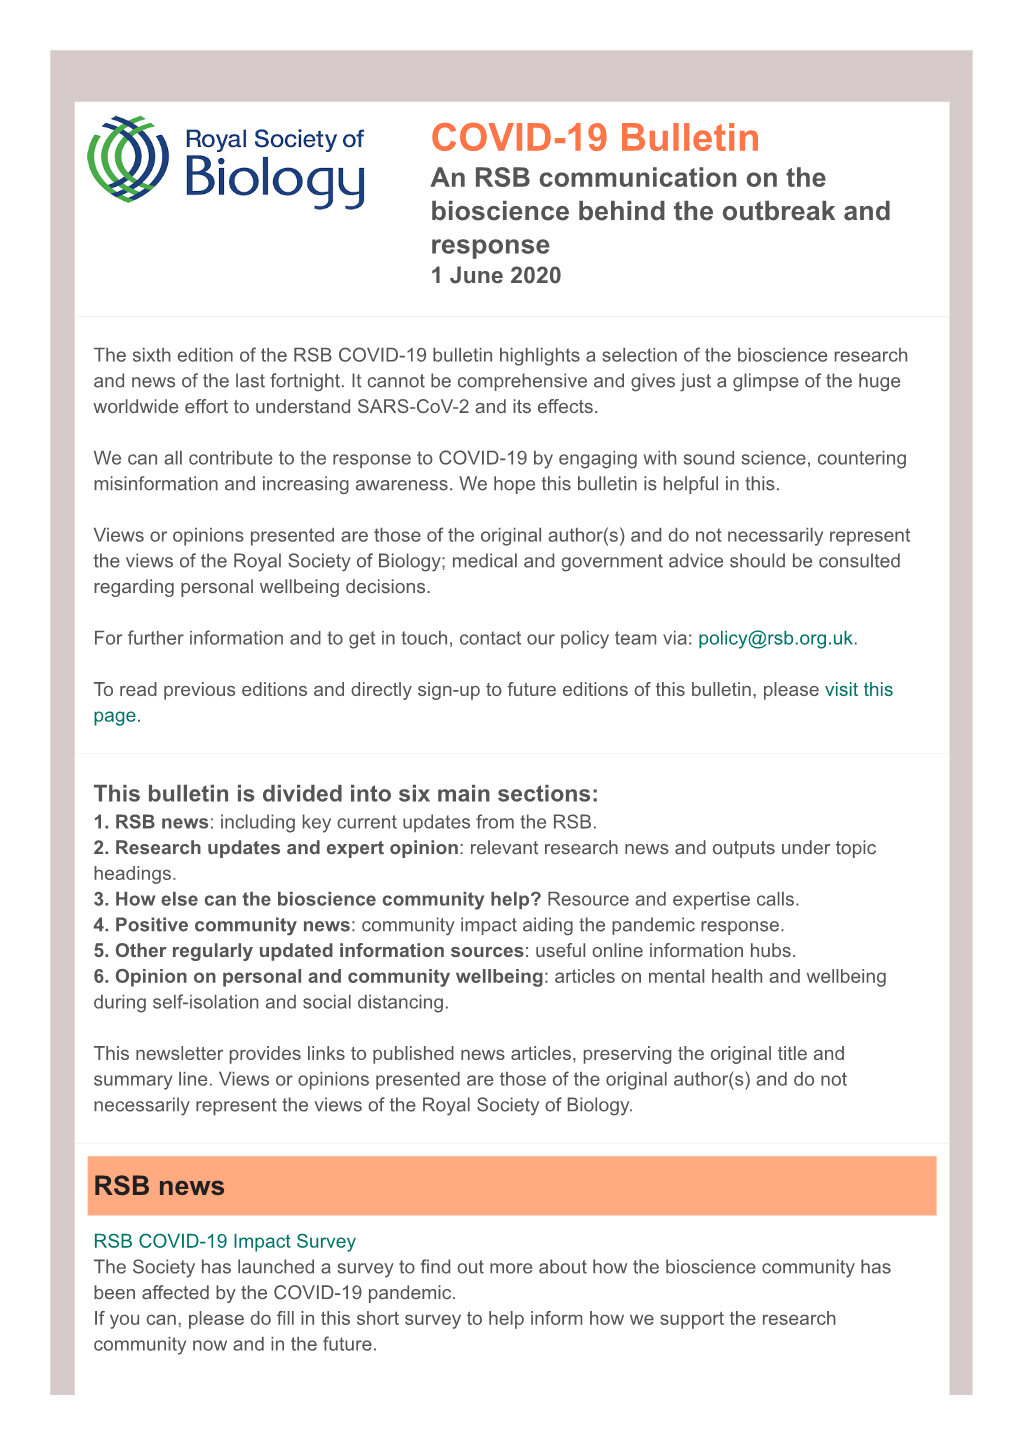 COVID-19 Bulletin an RSB Communication on the Bioscience Behind the Outbreak and Response 1 June 2020